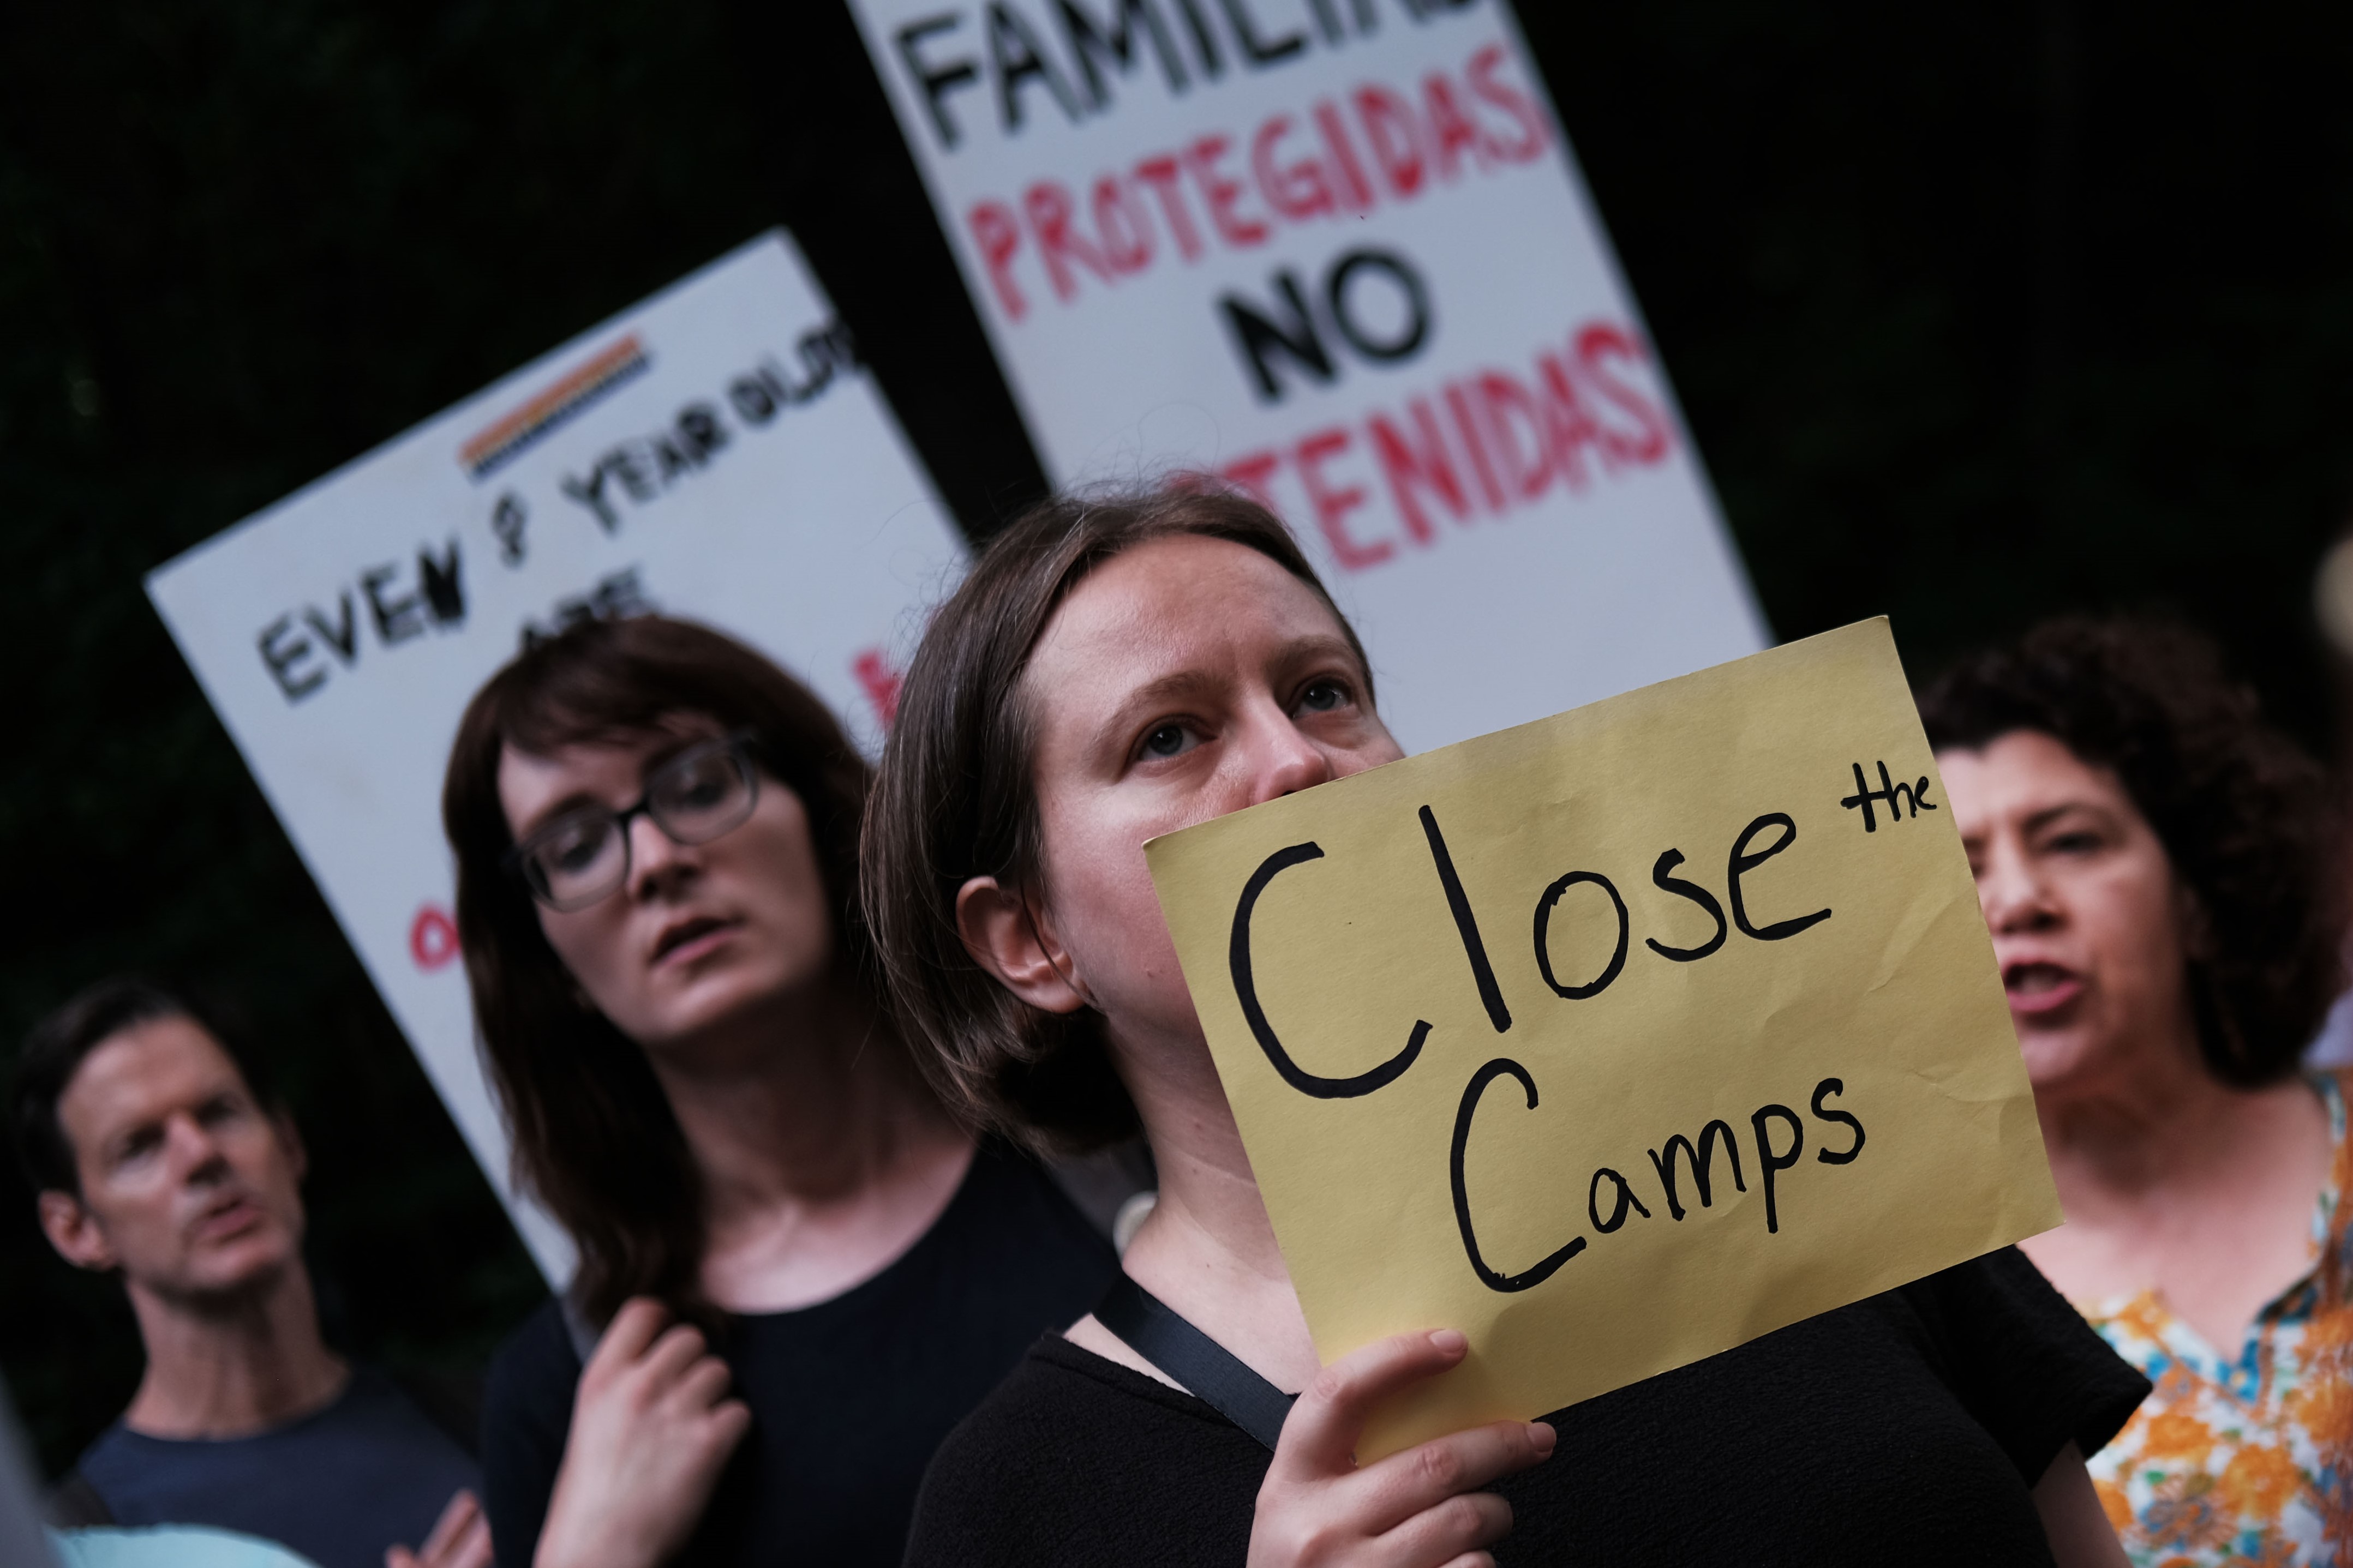 Hundreds of people gather in front of U.S. Senator Chuck Schumer's Brooklyn apartment to protest the migrant detention facilities on July 02, 2019 in New York City